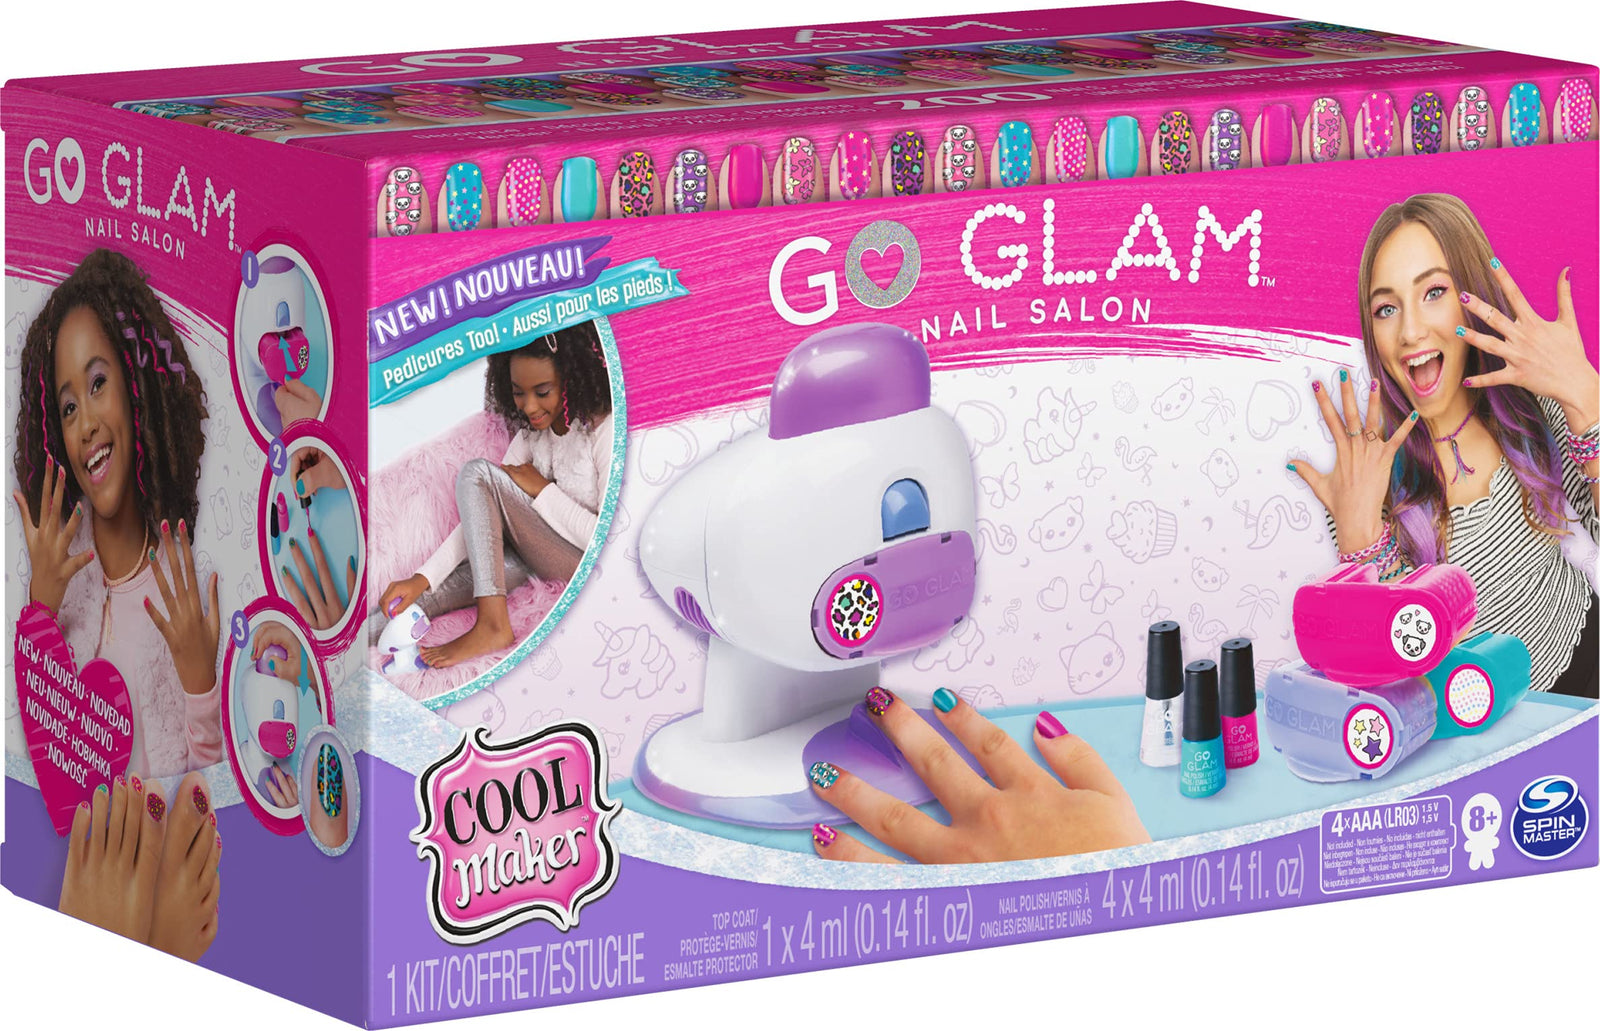 Cool Maker, GO Glam Nail Stamper Deluxe Salon with Dryer for Manicures and Pedicures with 3 Bonus Patterns and 2 Bonus Nail Polishes, Amazon Exclusive